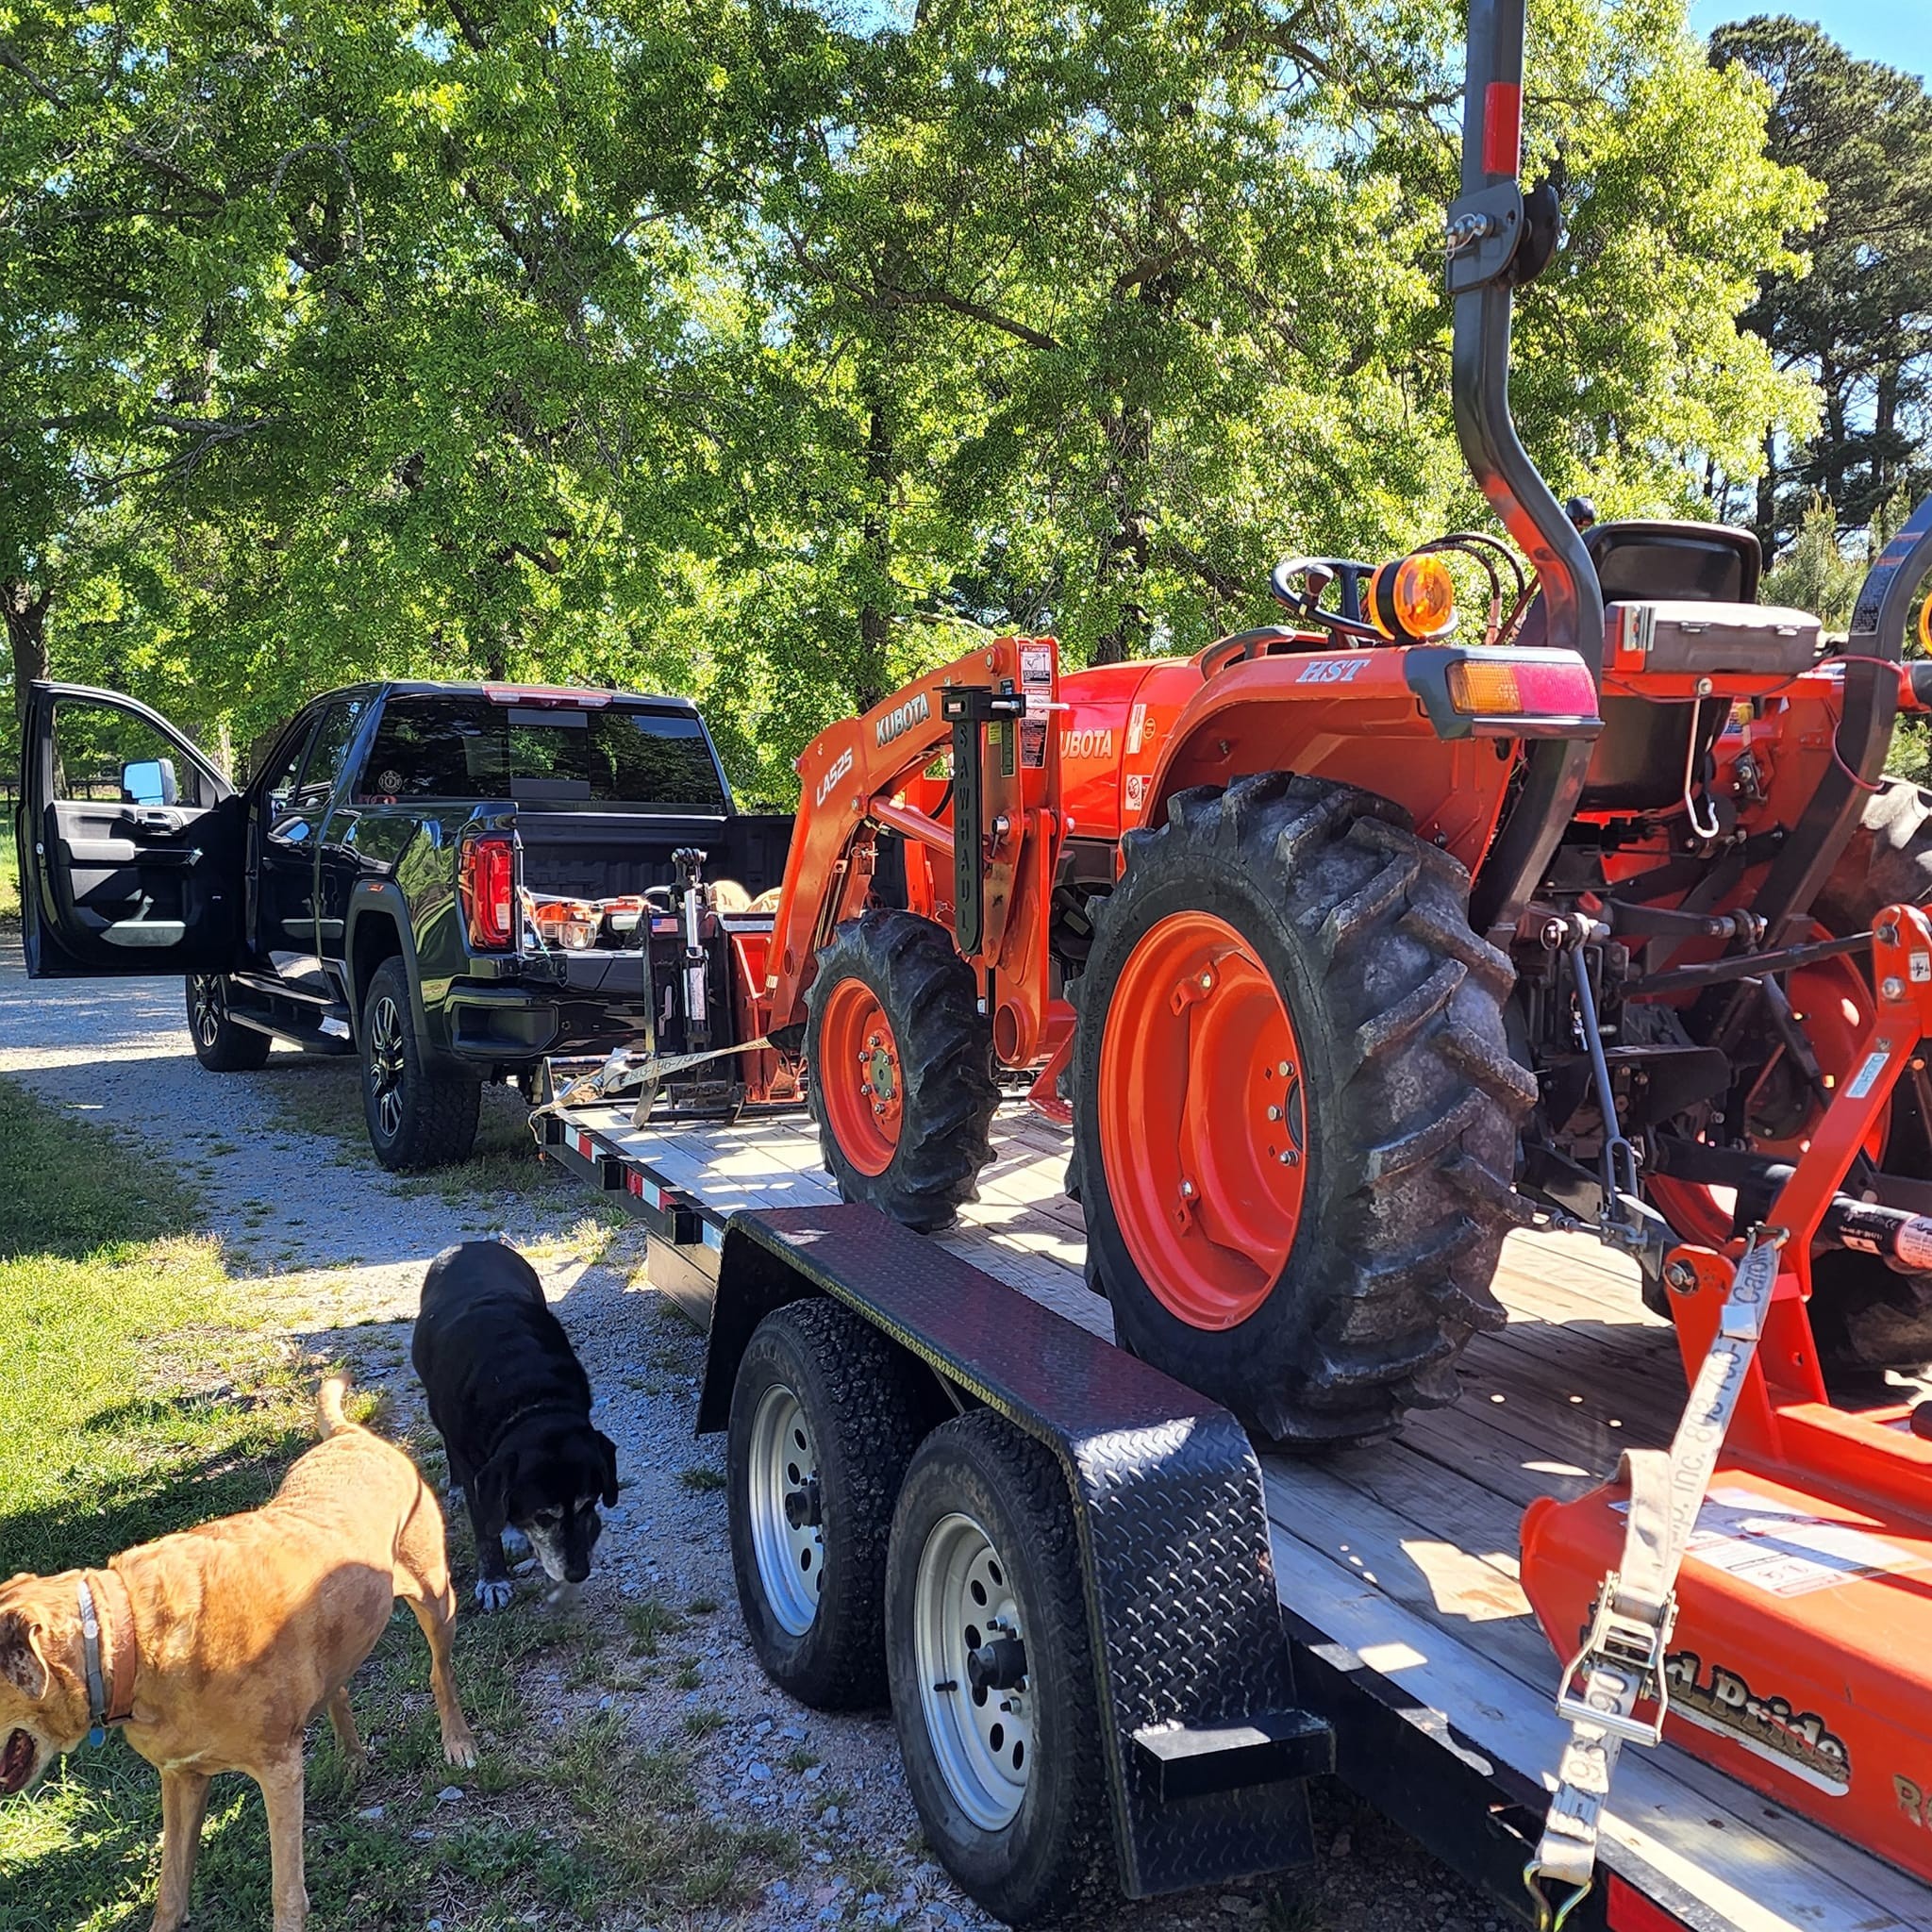 Muddy Paws Landscaping team in Lugoff, SC - people or person